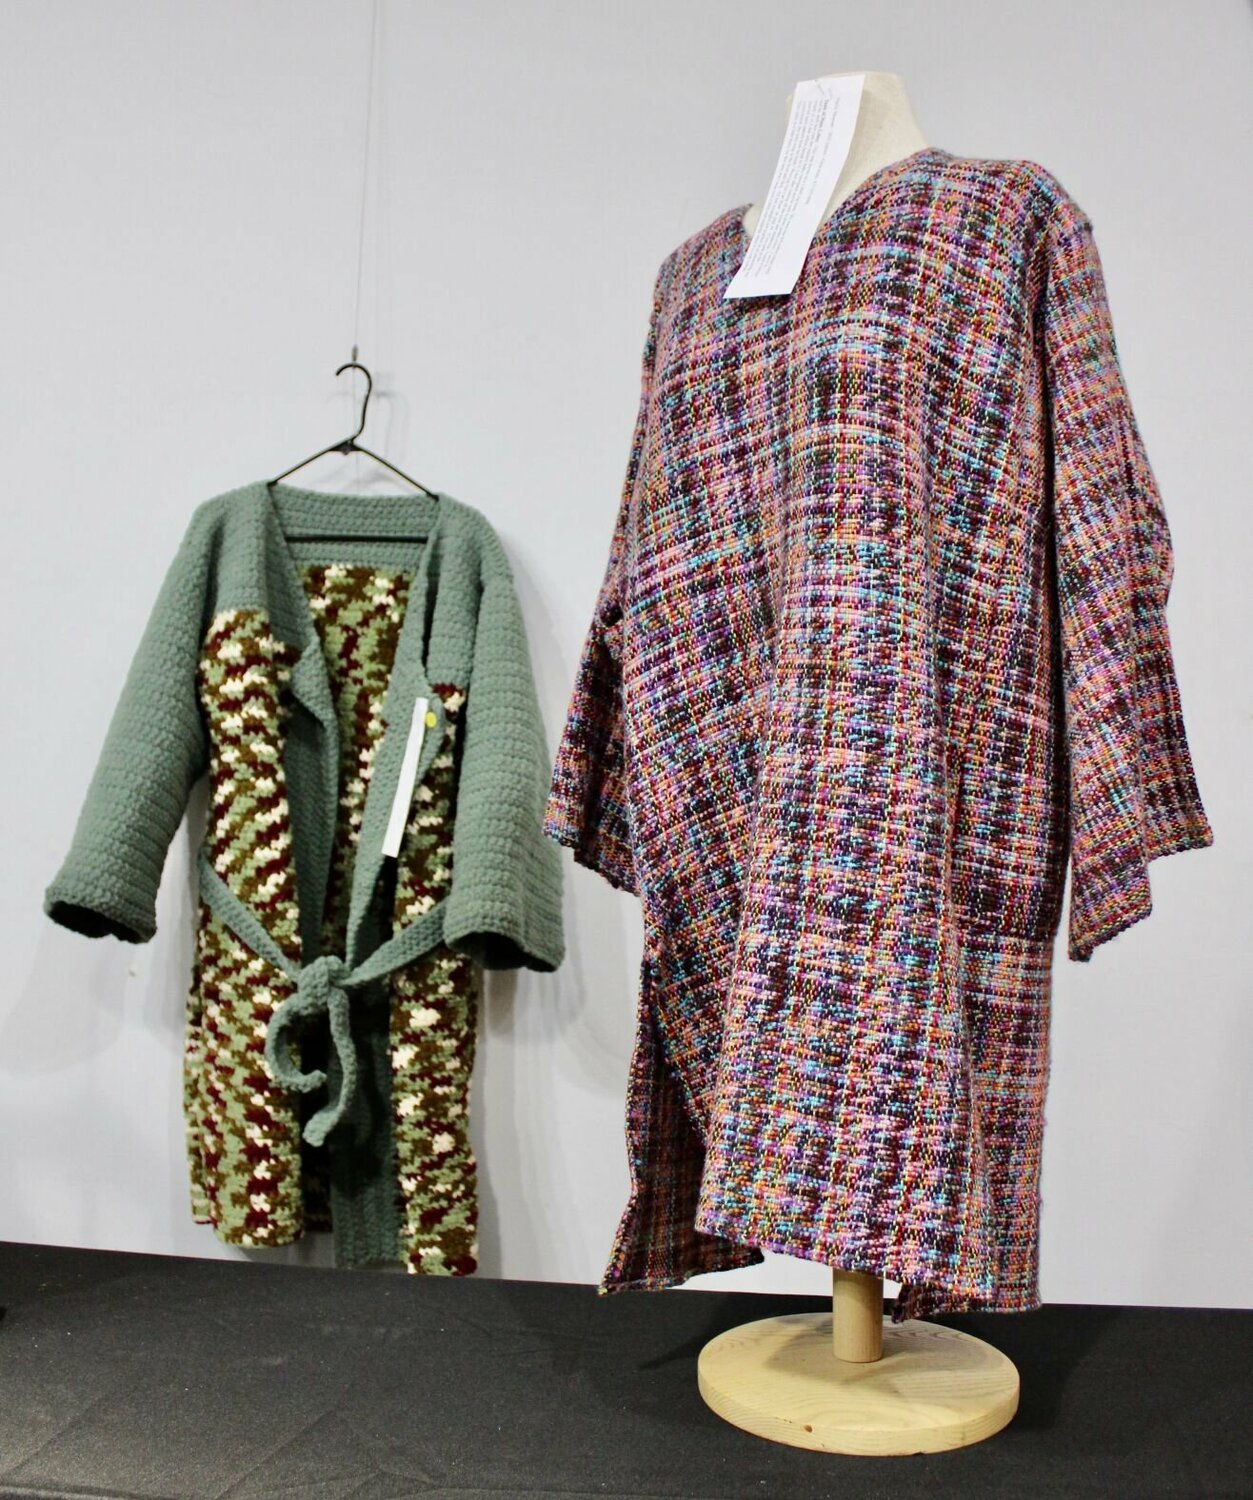 The 2024 Harlin Museum Fiber Arts Show on display through Feb. 18 at the museum, 405 Worcester St., in West Plains, features handcrafted quilts, clothing and other pieces featuring various textile techniques. Shown from left are a knitted robe entered by Darlene Stout and a woven tunic entered by Gena Stout. Votes for a People's Choice Award will be taken through the end of the exhibit. Museum hours are noon to 4 p.m. Thursdays through Sundays. Admission is free with donations accepted to go toward the operation and upkeep of the nonprofit museum, which hosts shows for area artists in different mediums throughout the year. The museum also houses a permanent collection of art by Shannon County native L.L. Broadfoot and historical items representative of daily life in the Ozarks.